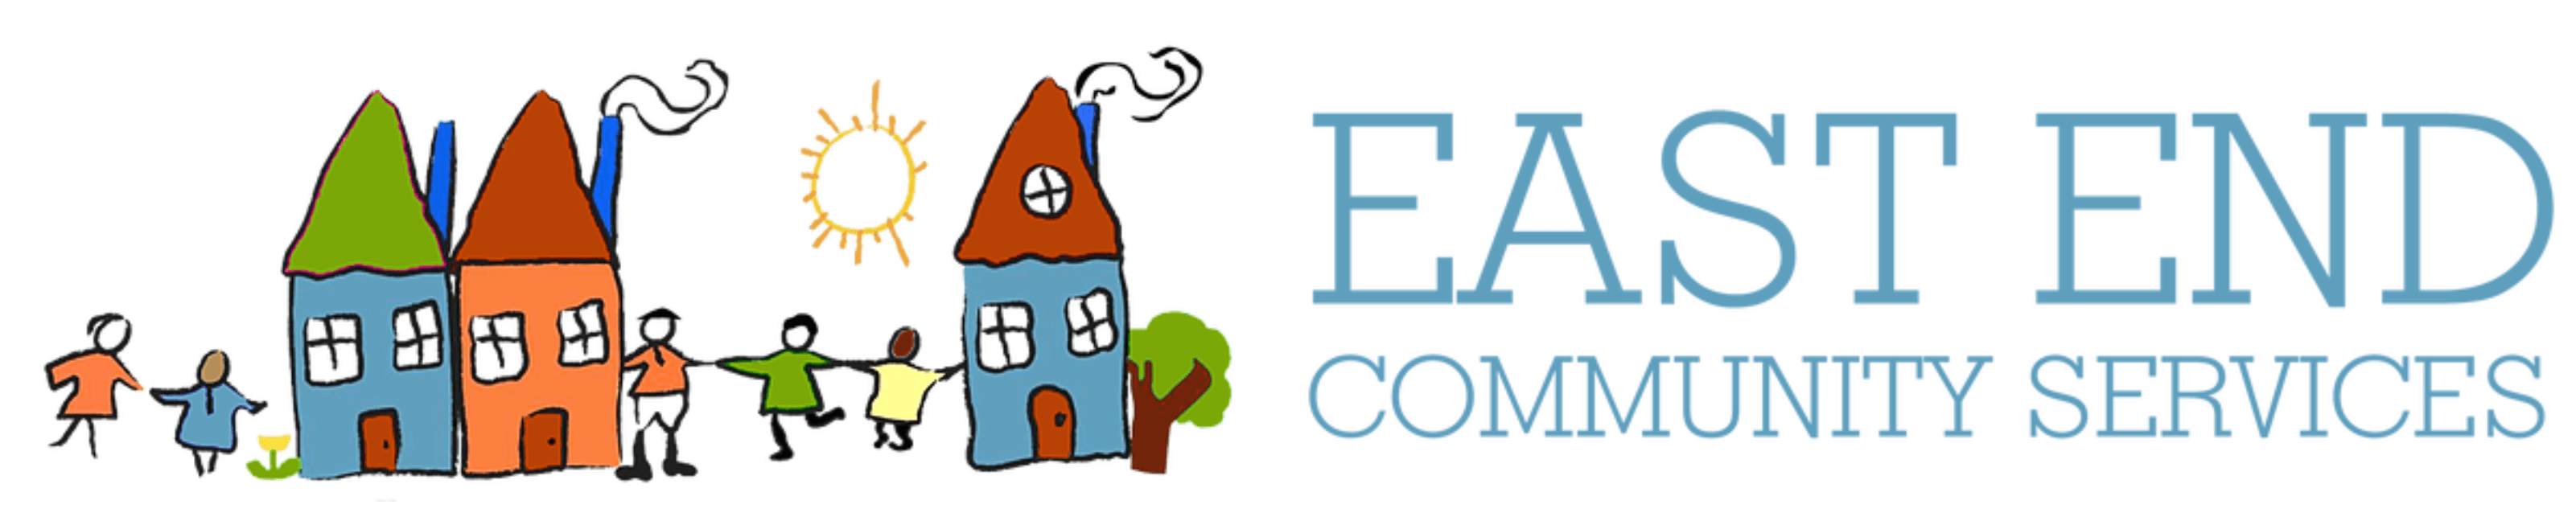 East End Community Services